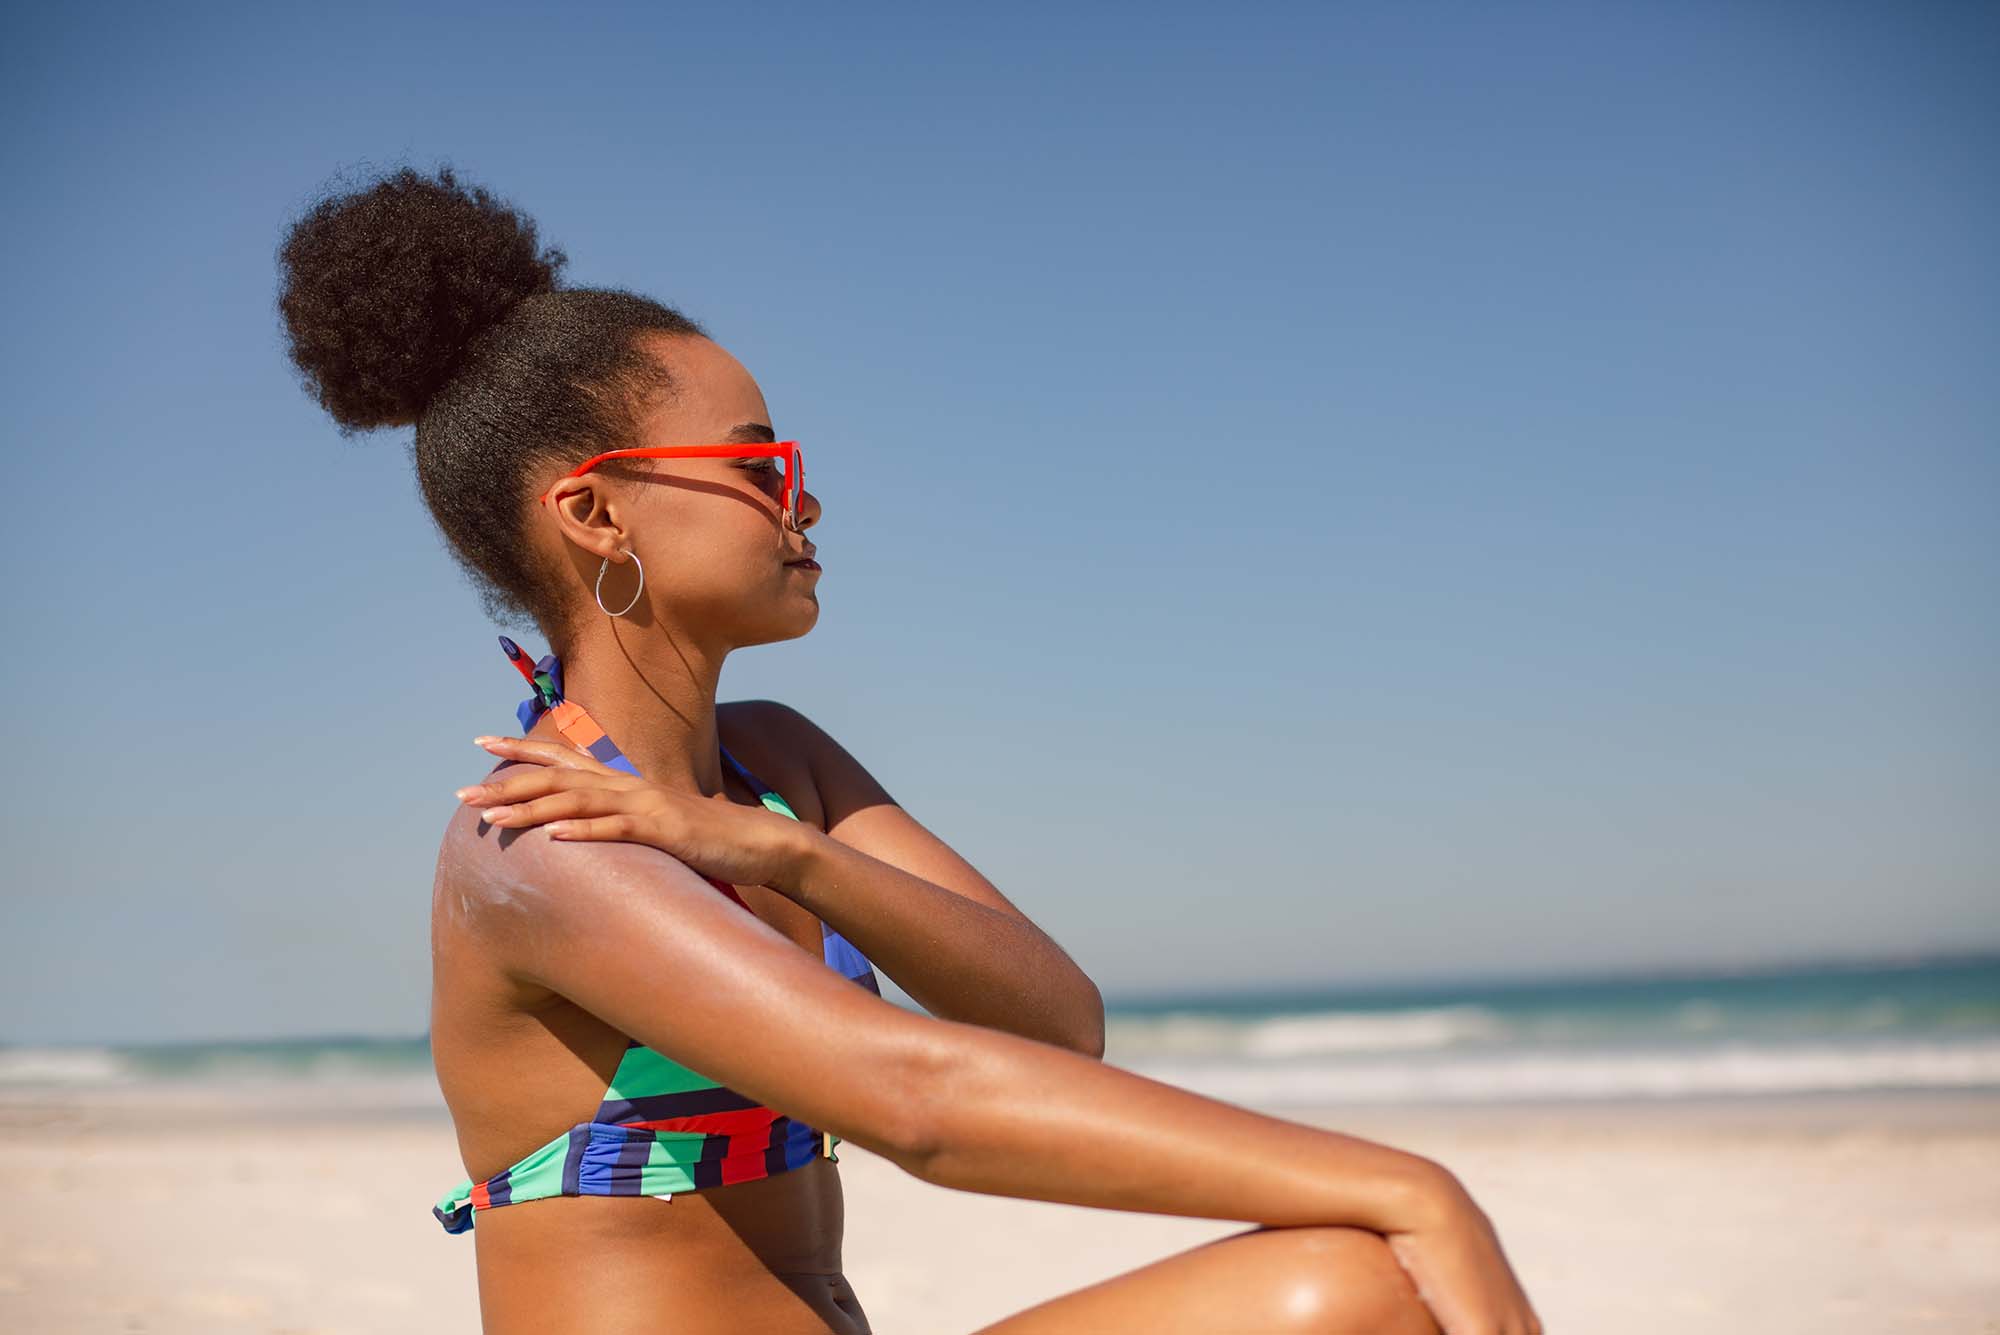 Photo taken from the side of a Black woman in a colorful, striped bikini applying sunscreen lotion on her right shoulder at beach in the sunshine. She sits on the ground and looks towards the water as she applies sun screen. She wears red sunglasses and silver hoop earrings. A clear blue sky and small waves crashing can be seen blurred in the background.